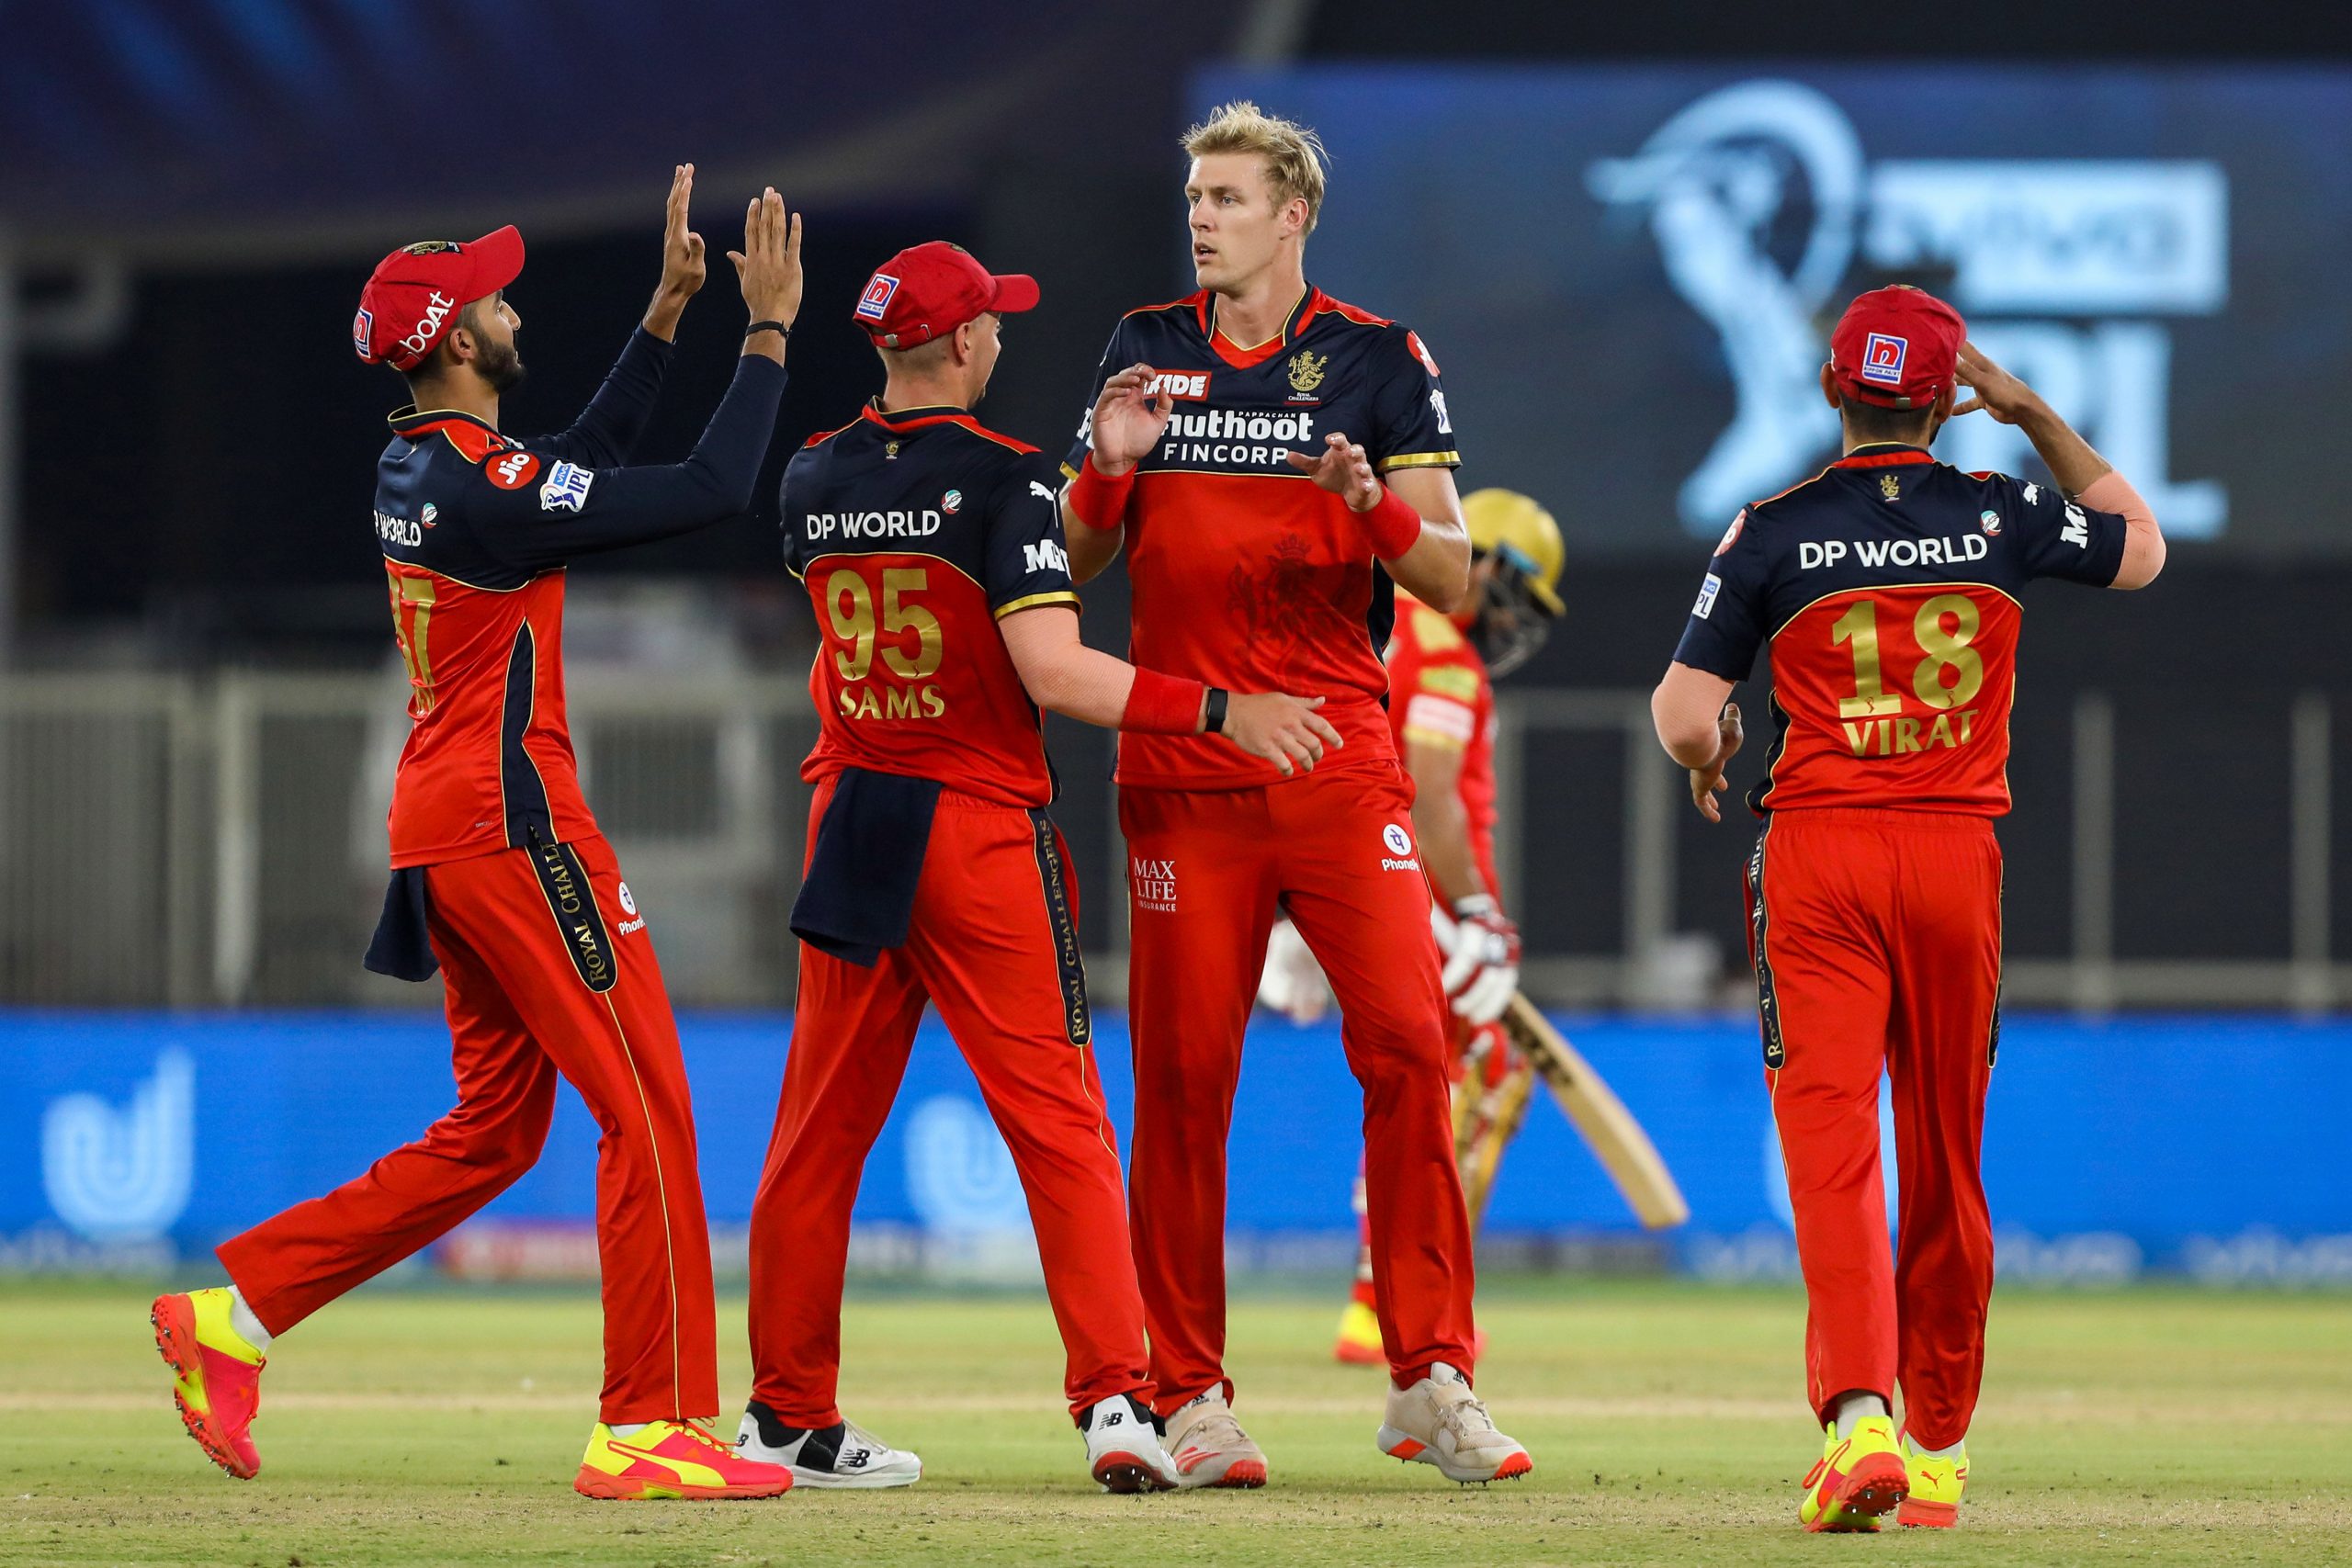 IPL 2021: Why is RCB’s Kyle Jamieson not playing vs CSK?